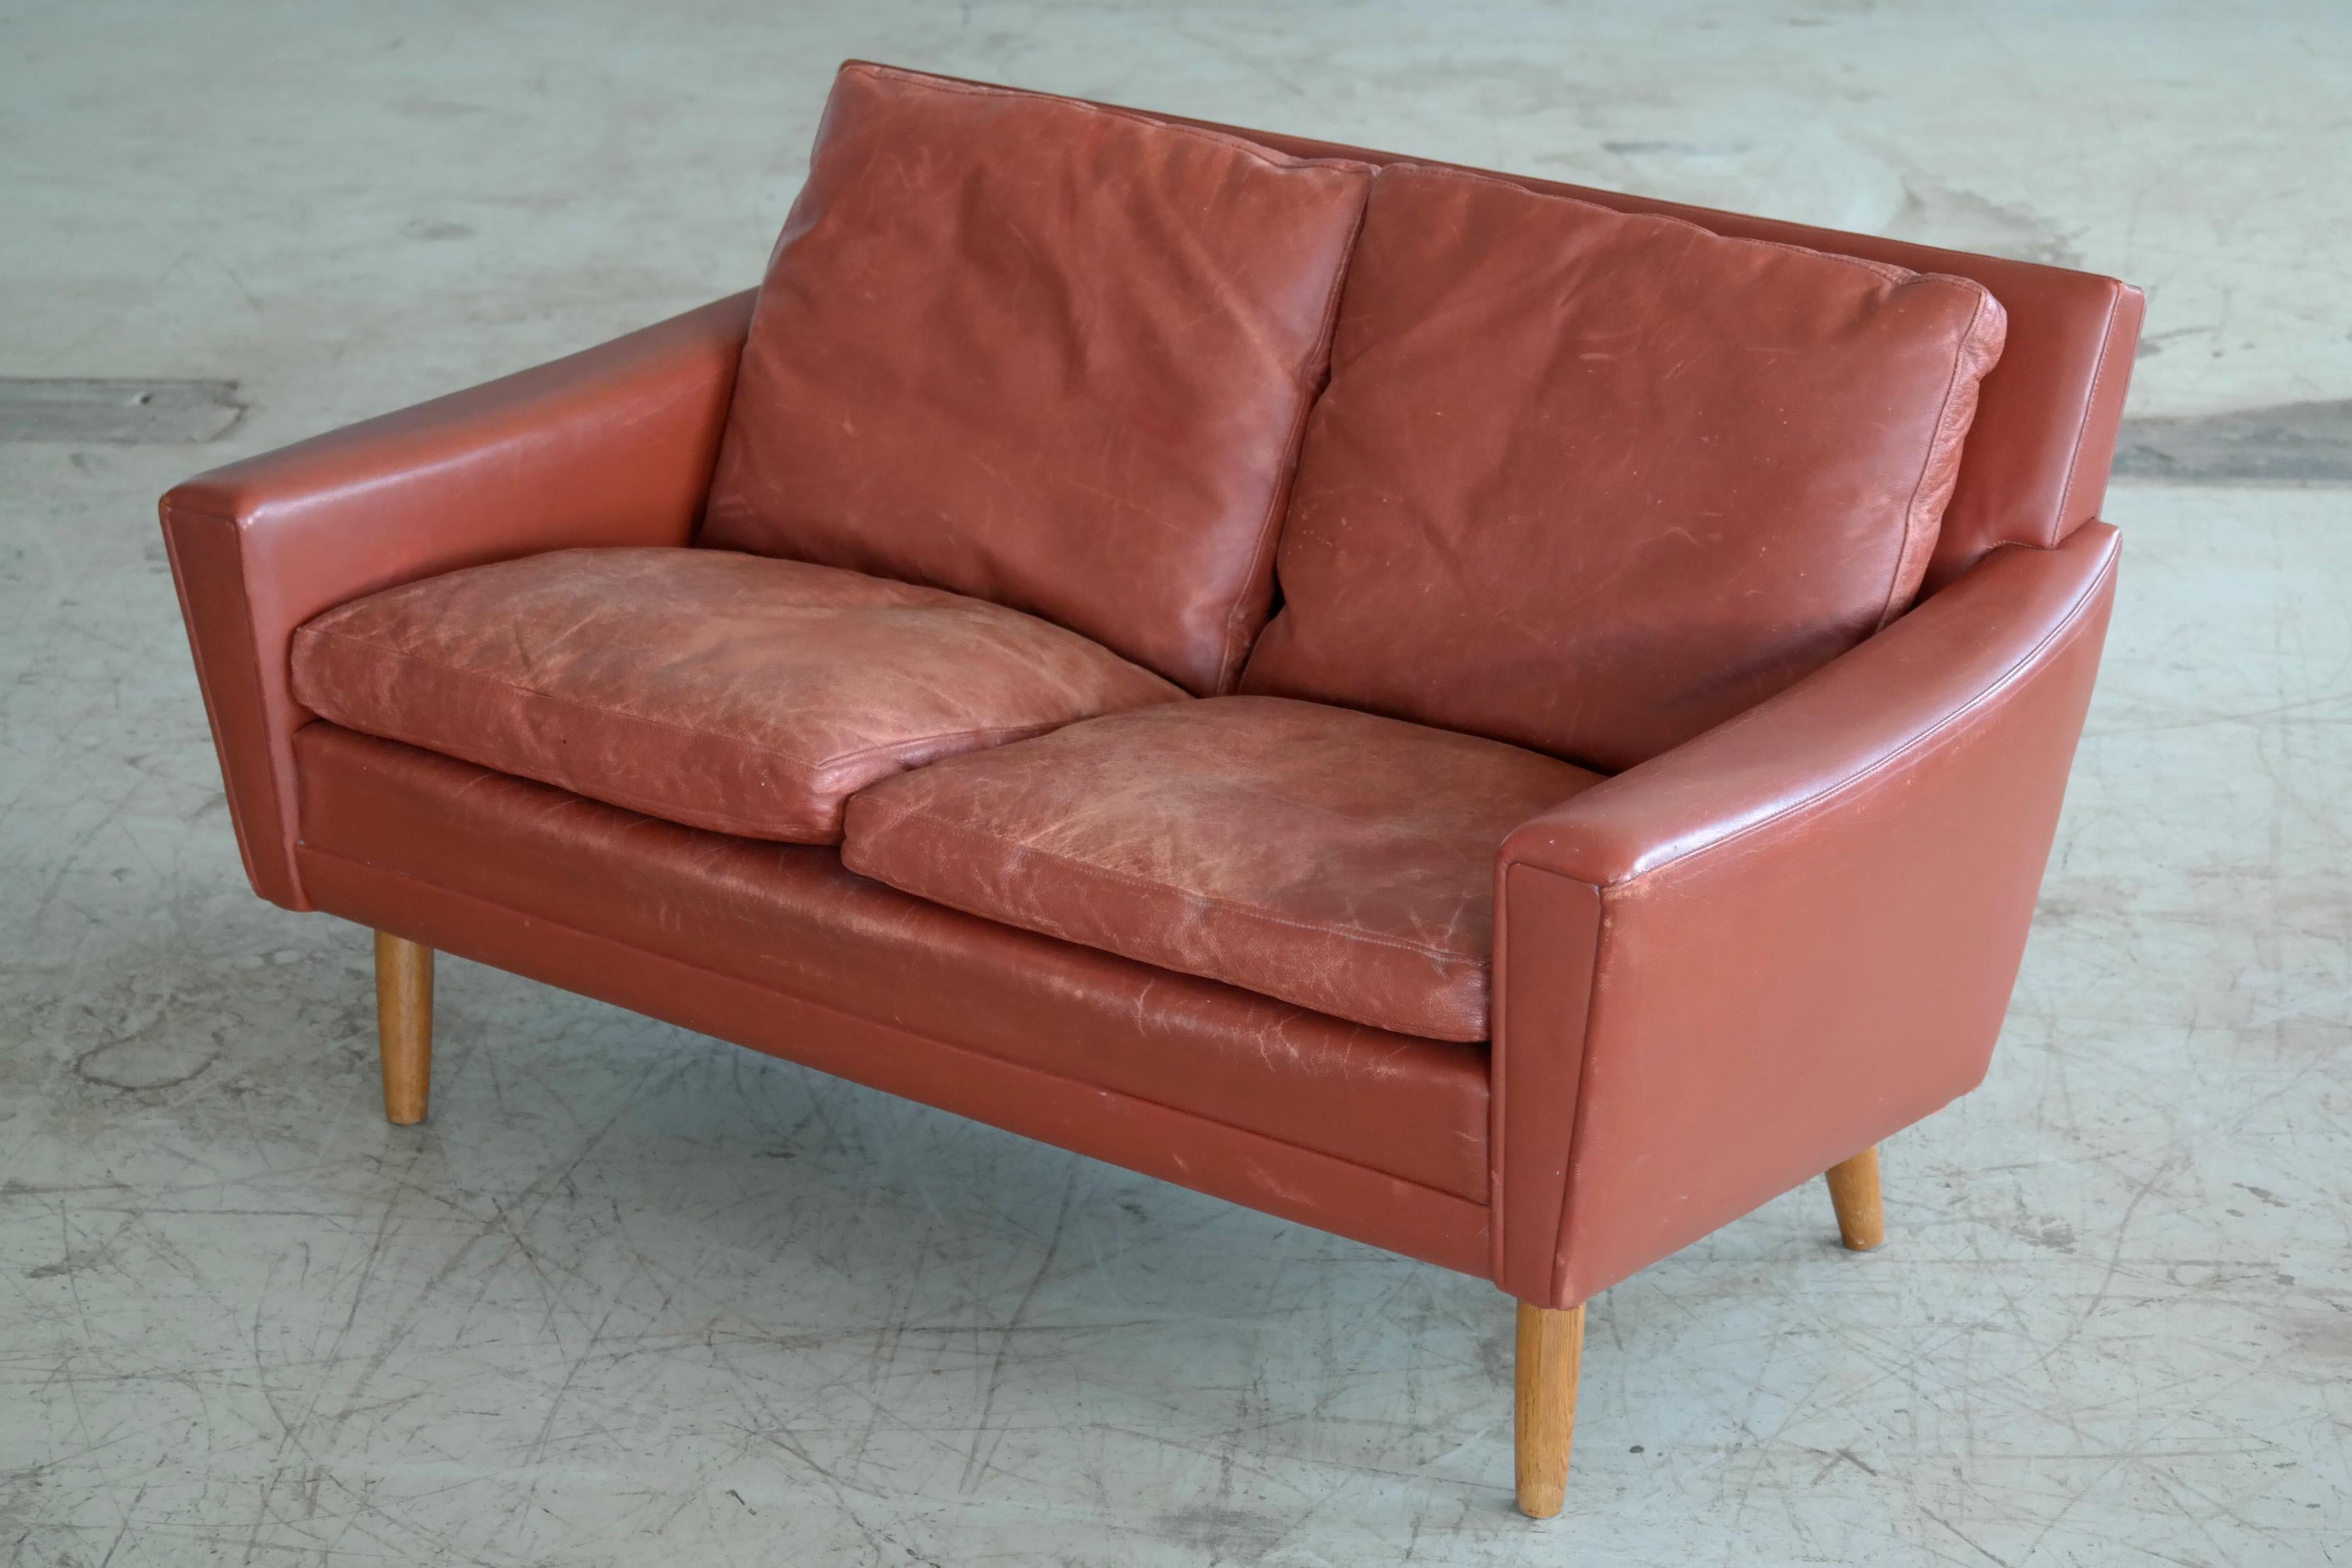 Very elegant Classic midcentury Danish sofa in nice red leather raised on oak legs. Likely made in the 1960s by Rolschau Mobler with the design attributed to Kurt Ostervig. Solid and sturdy and in good vintage condition with the leather still